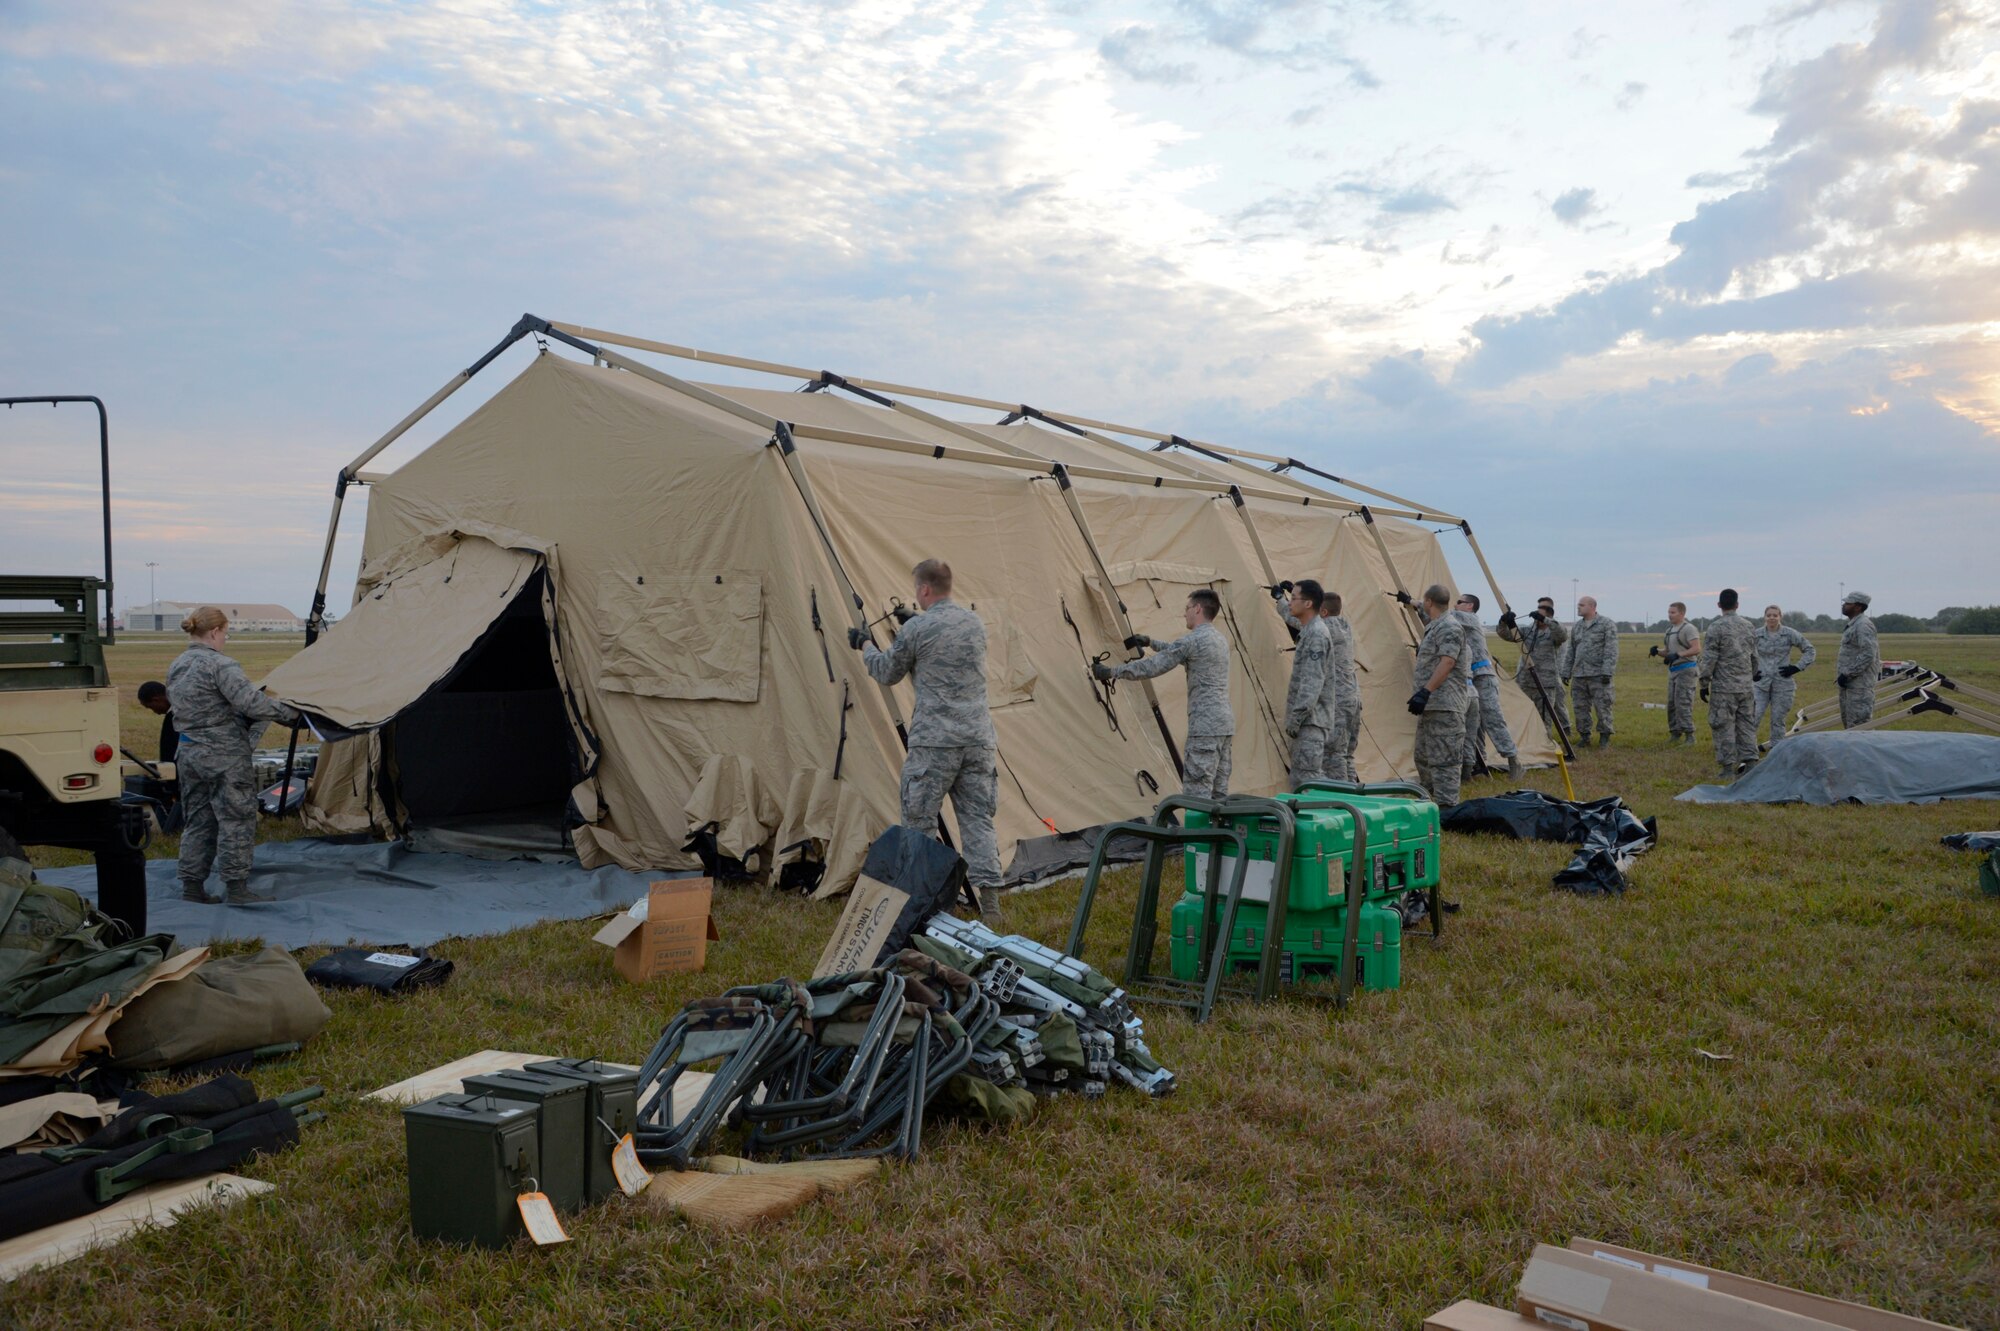 Airmen from the 6th Medical Group build a tent during an aeromedical evacuation exercise at MacDill Air Force Base, Fla., March 12, 2017. The exercise compiled knowledge and hands-on training of site acquirement, set up, patient movement, care and staging. (U.S. Air Force photo by Senior Airman Tori Schultz)